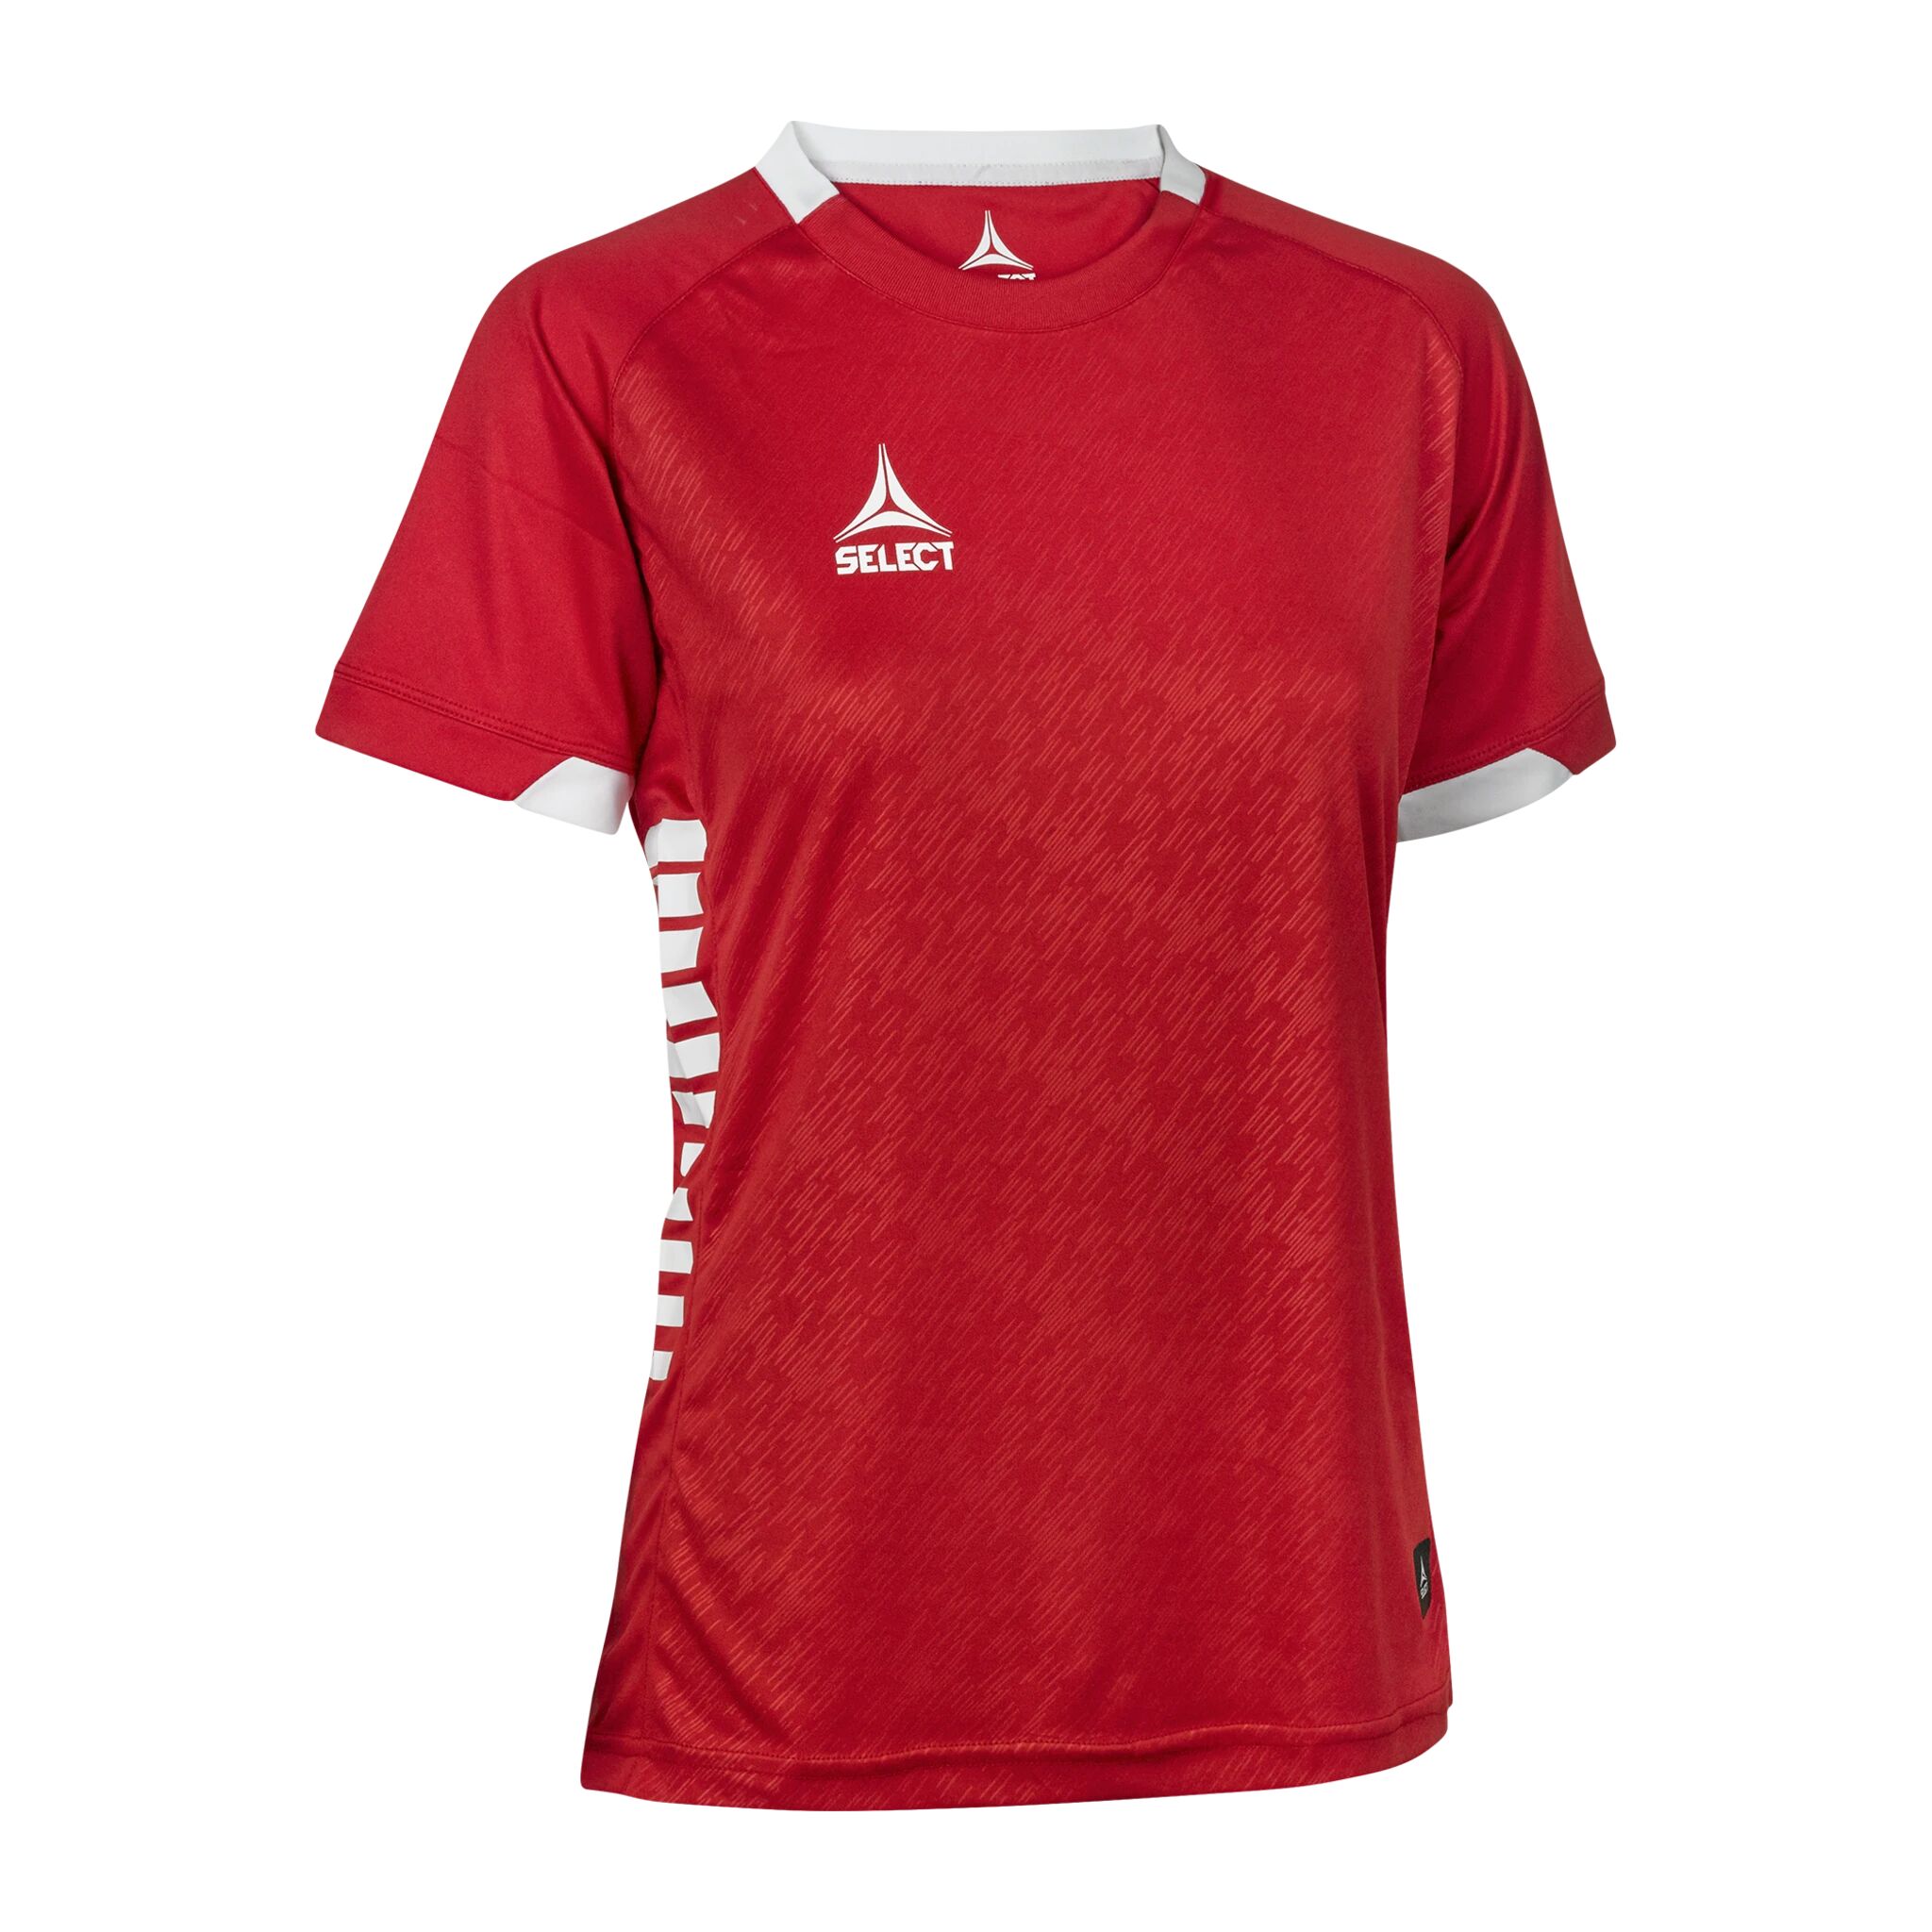 Select Player shirt S/S Spain women, t-skjorte dame L RED